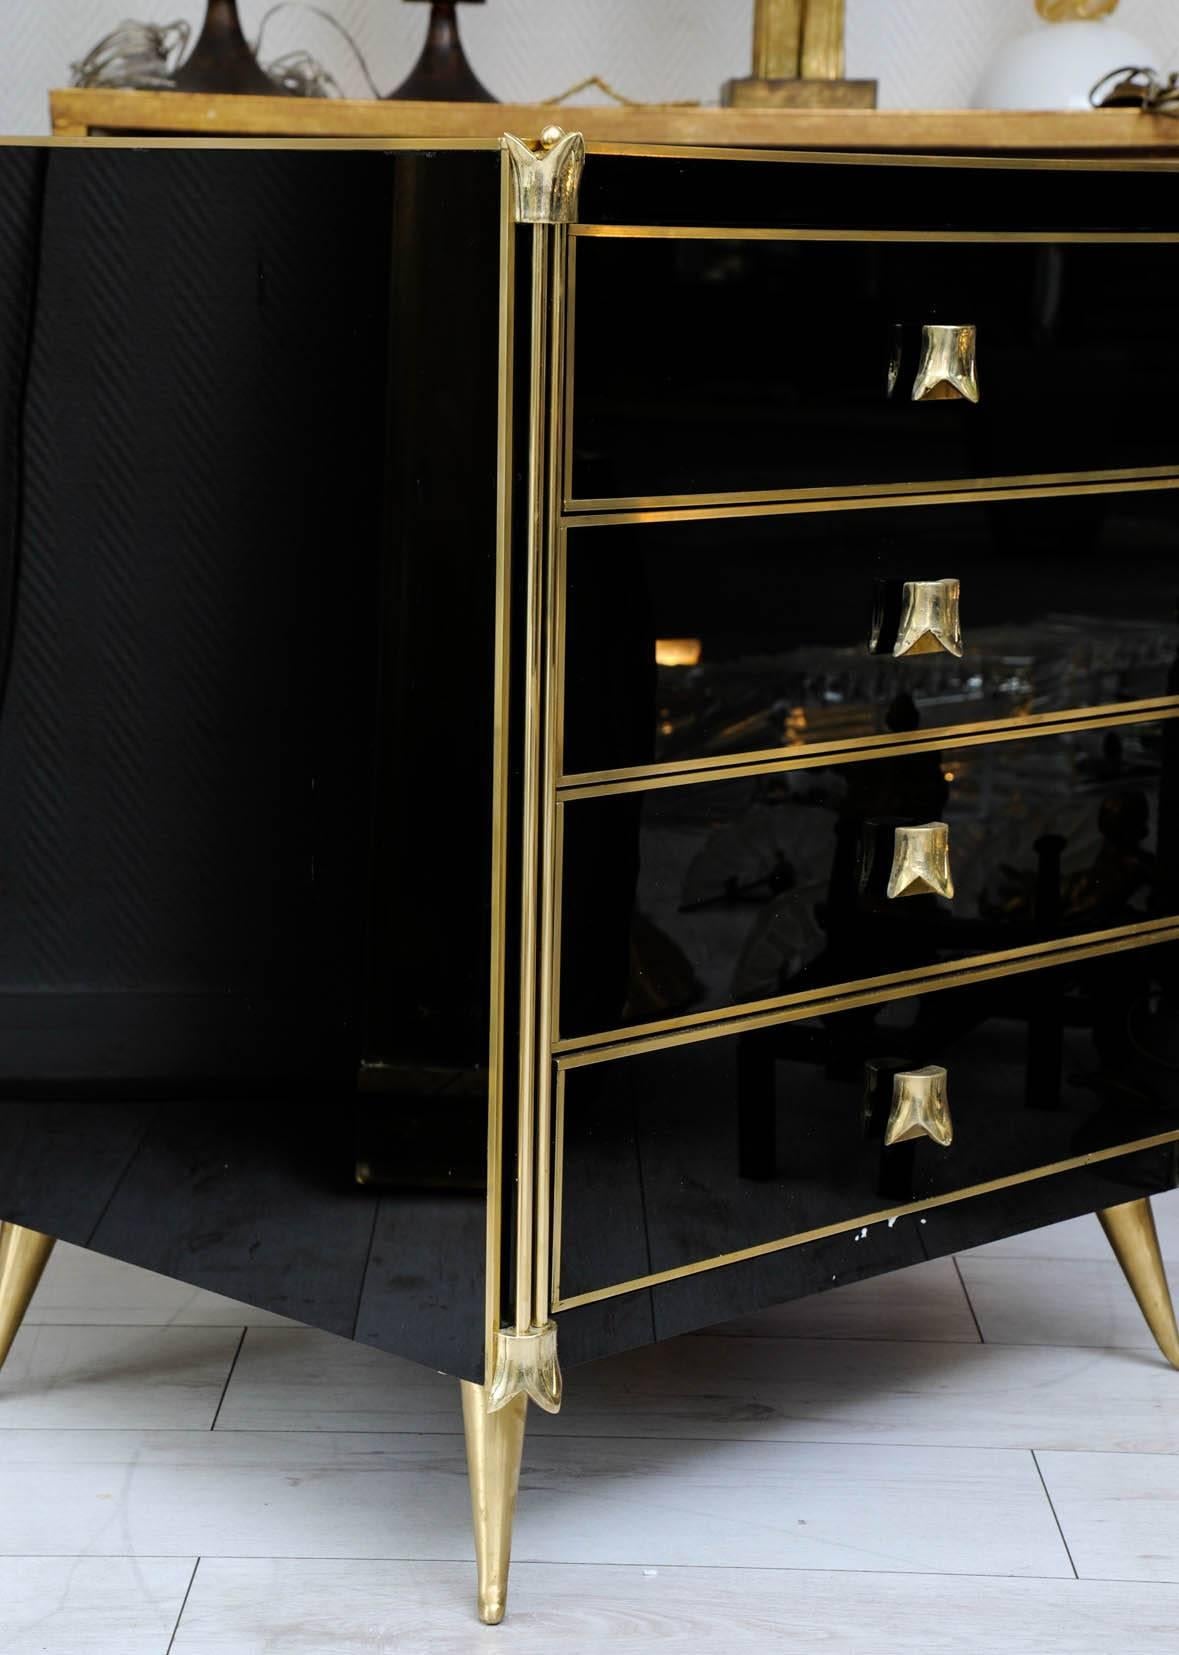 Brass Pair of Nightstands or Commodes with Four Drawers in Tinted Black Glass